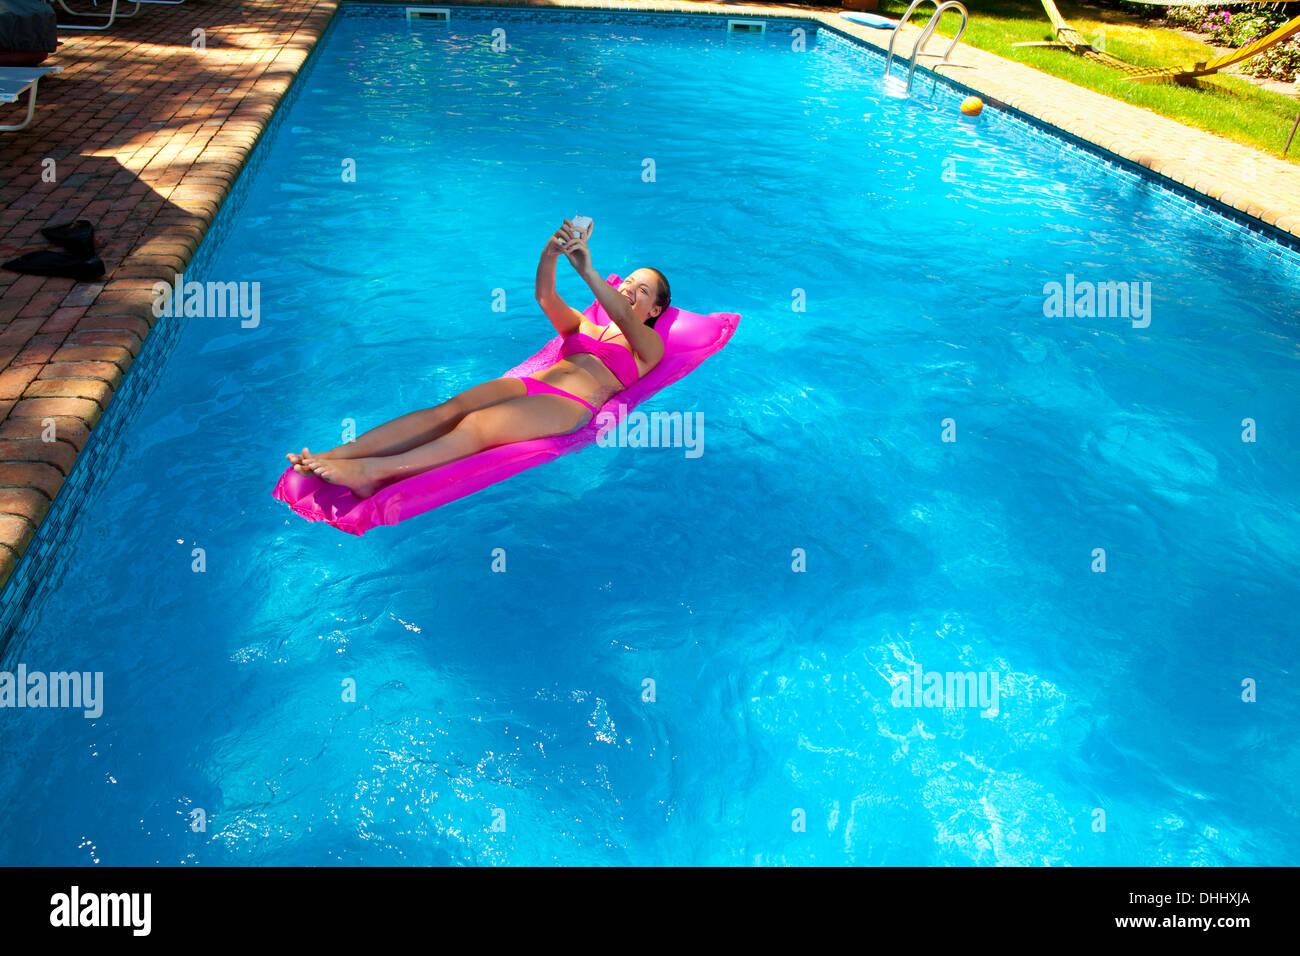 Girl on inflatable bed in pool Stock Photo